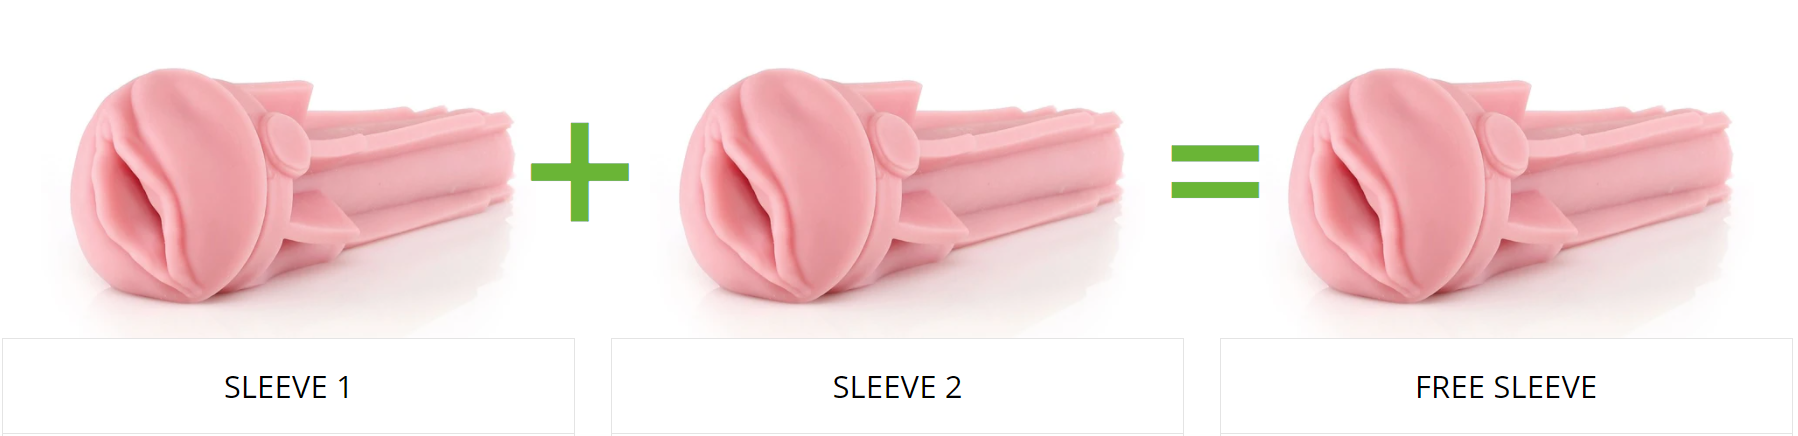 Fleshlight get three sleeves for the price of two